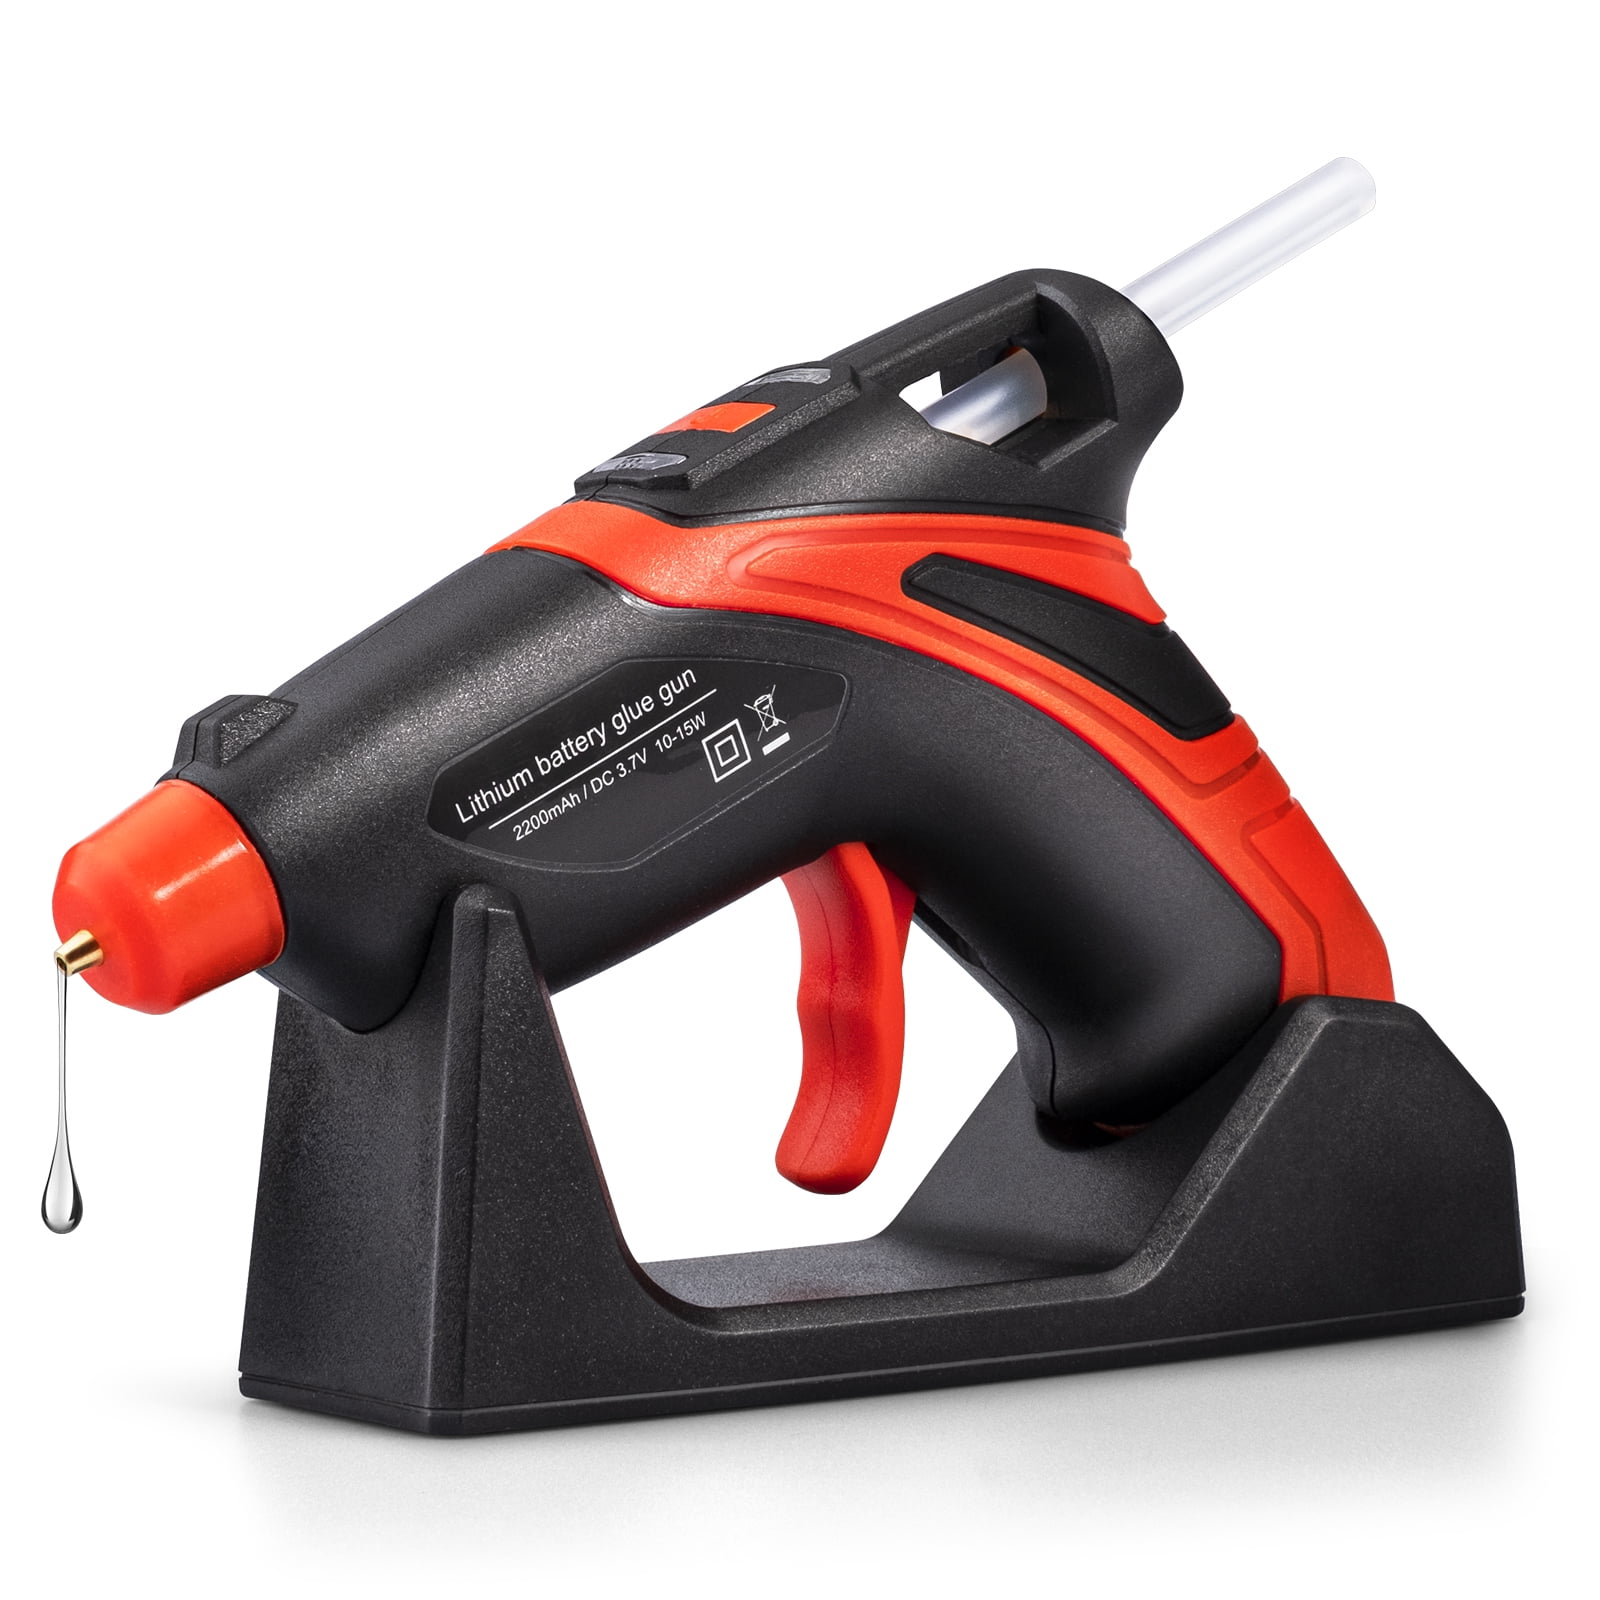  RAPID Battery-Powered Electric Glue Gun BGX500 P4A 18V Power,  DIY Glue Gun - Quick Warm-Up, Glue Flow Adjuster, Exchangeable Nozzles, LED  Heat Indicator, Tool ONLY (5001517) : Tools & Home Improvement